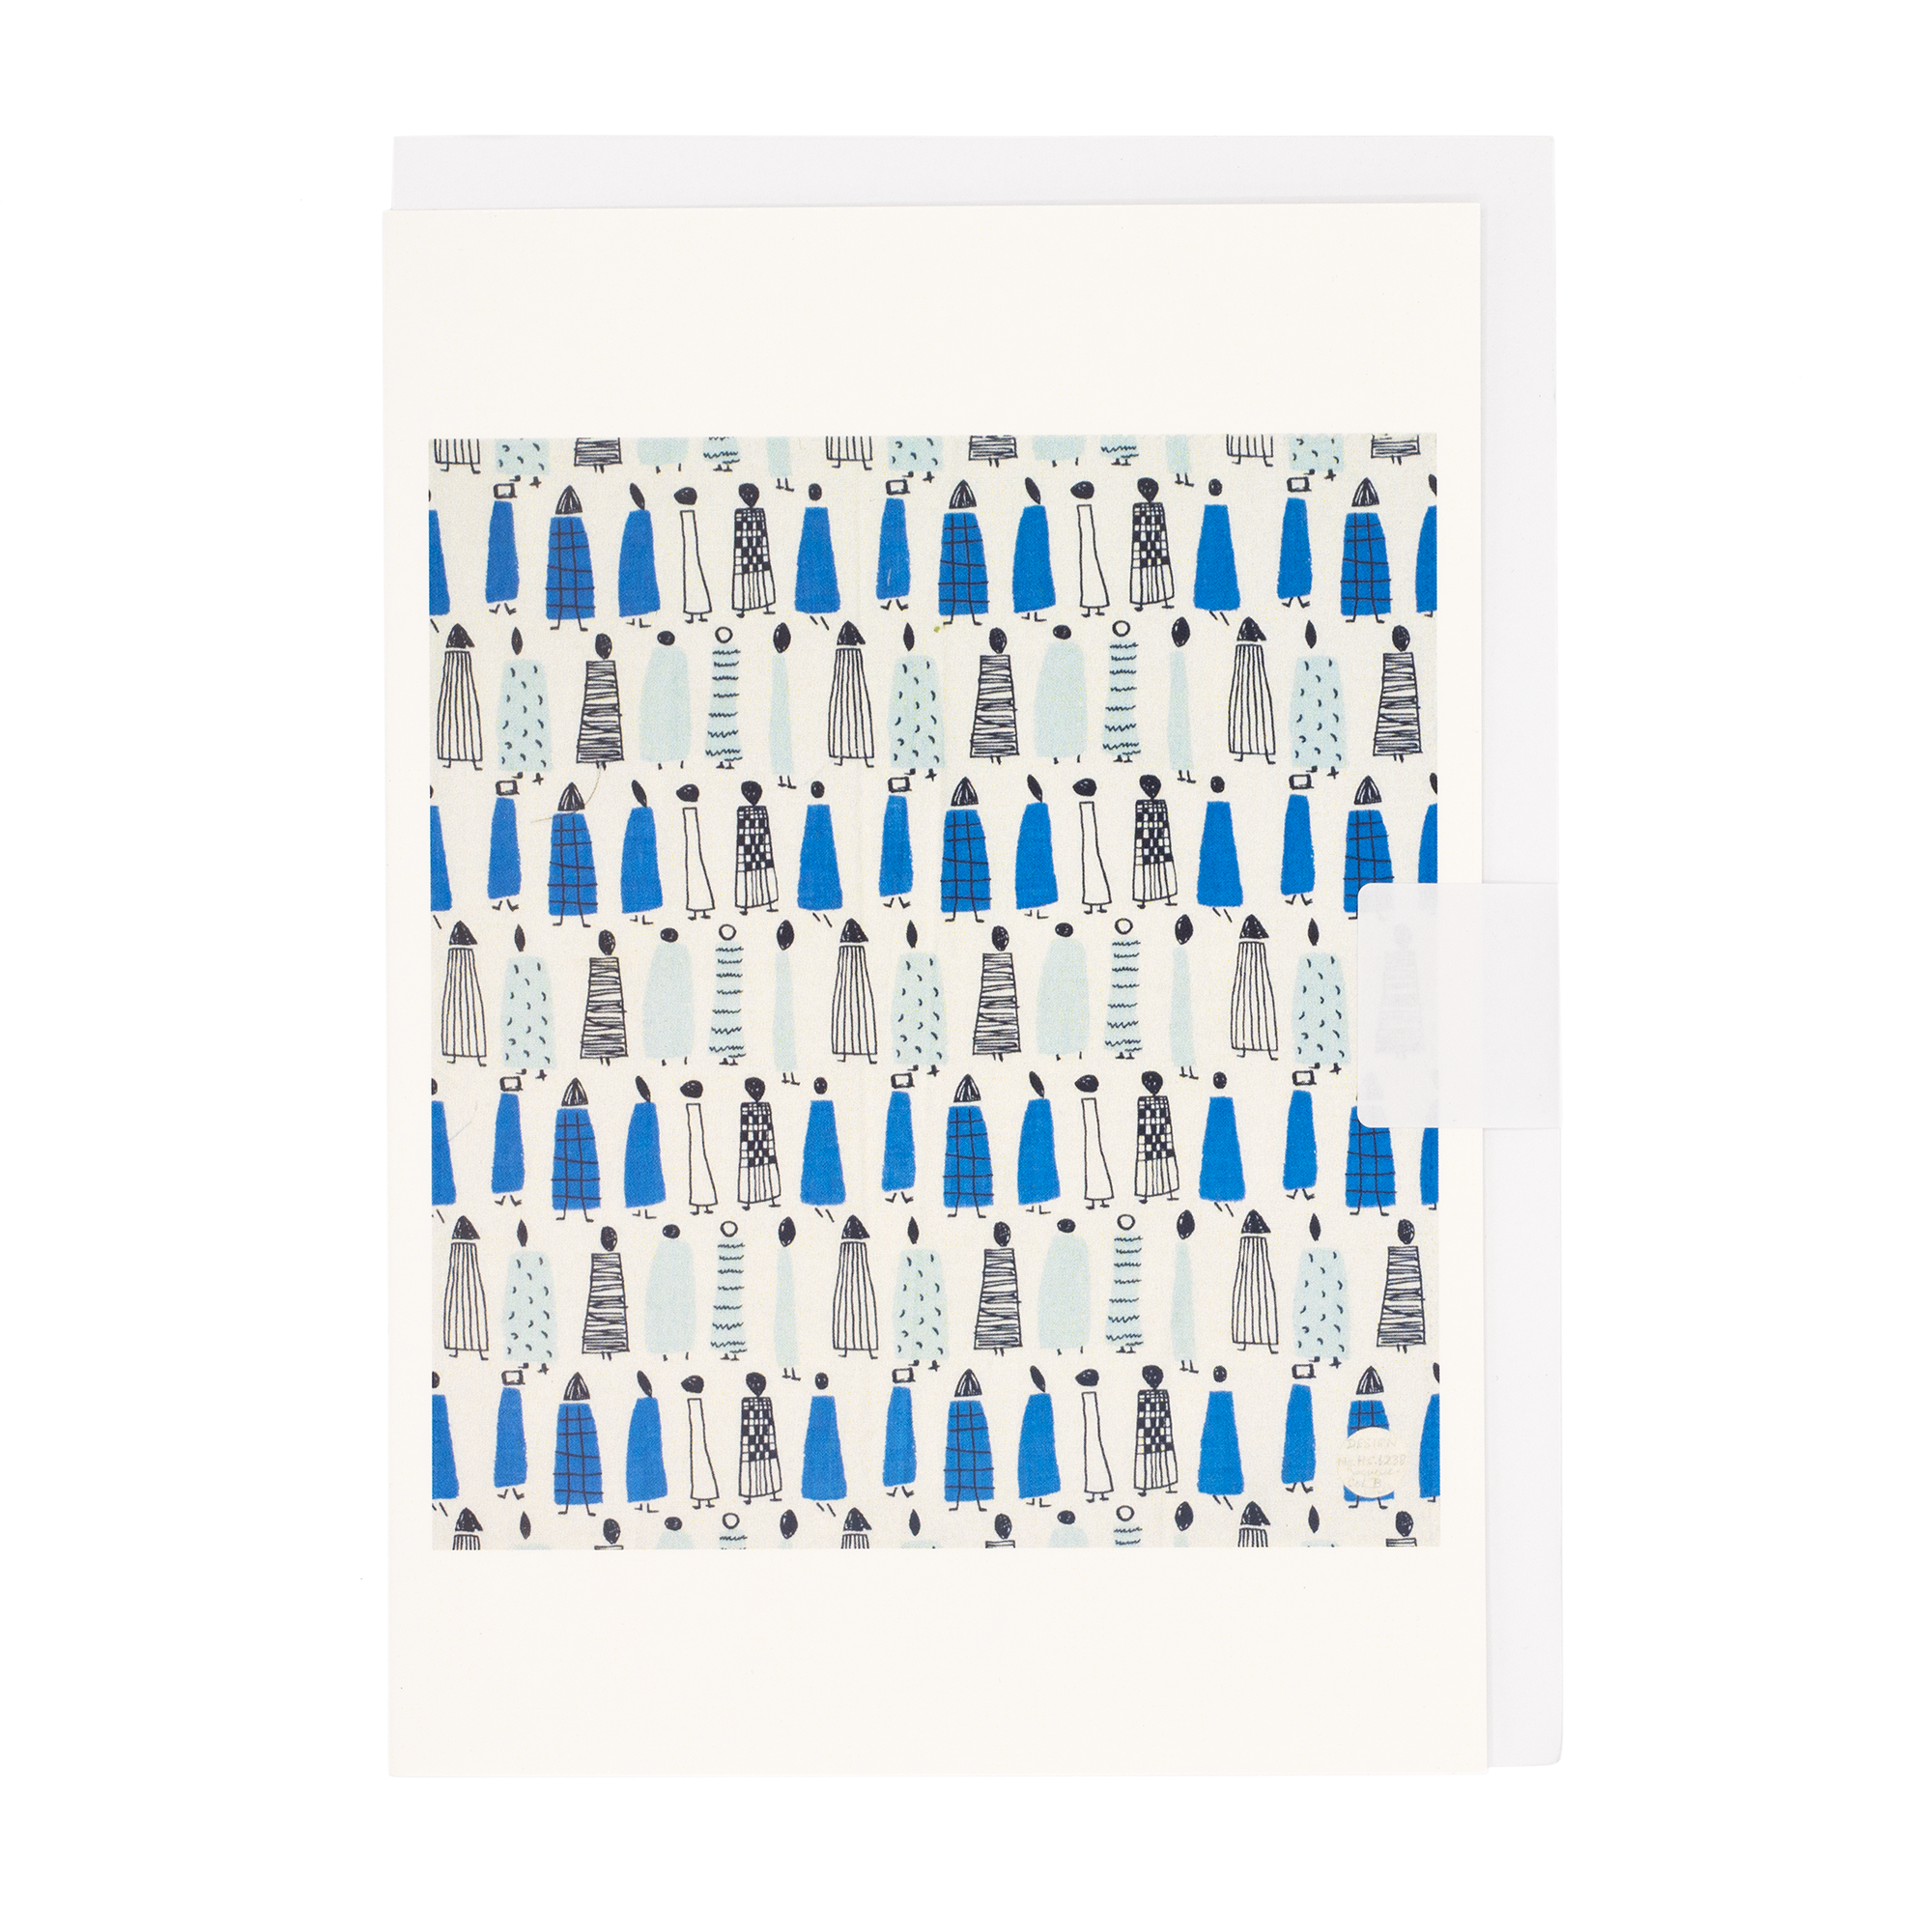 Greetings card with Lucienne Day's Sequence design. Repeat pattern of women in blue coats